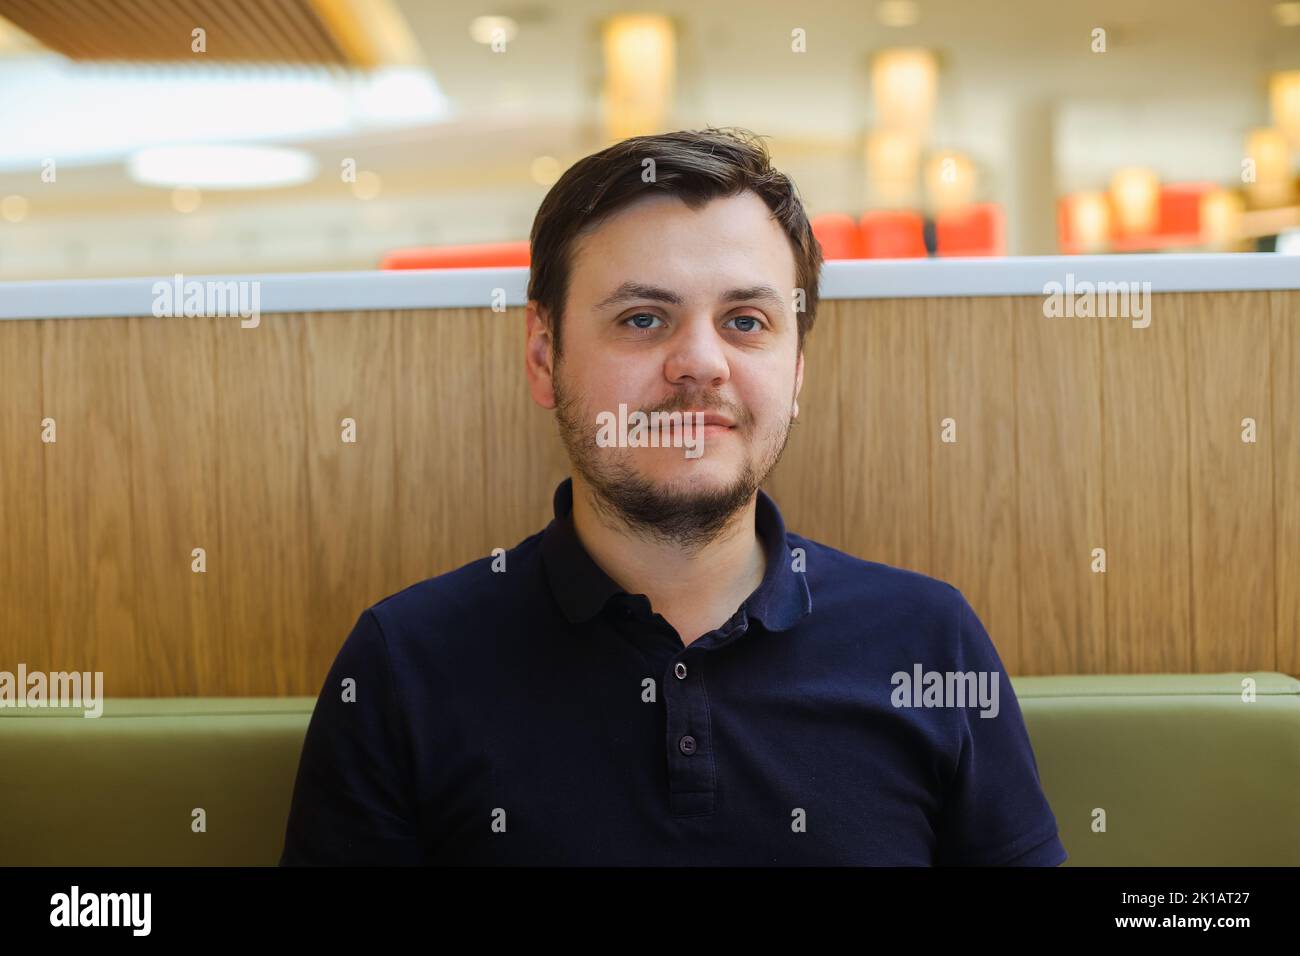 looking at the camera smiling young 32 years old caucasian unshaven beard man in a navy blue polo shirt in cafe at the food court. Waiting concept, he Stock Photo